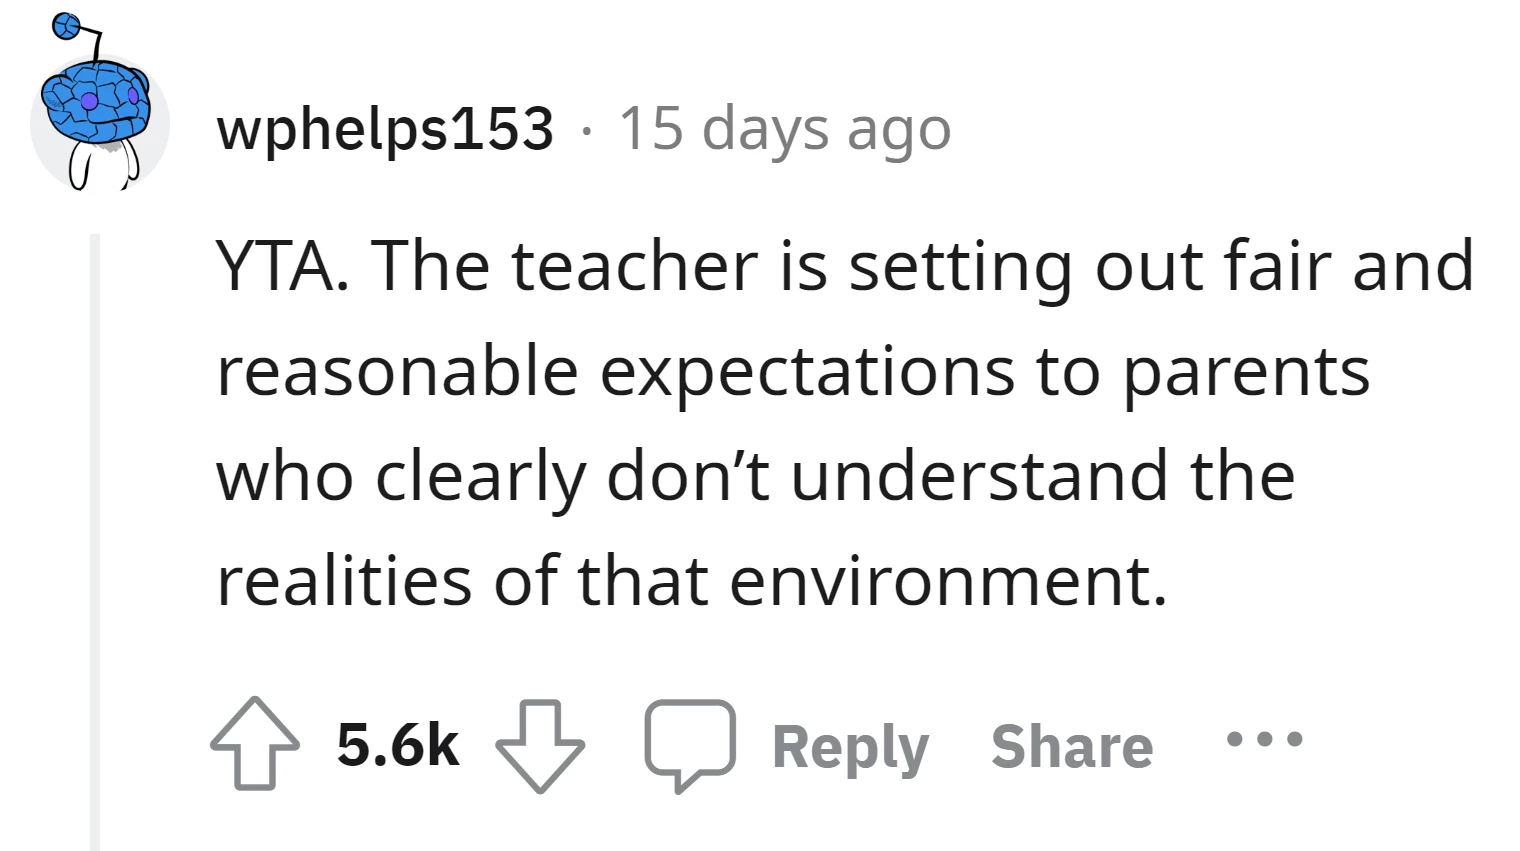 wphelps153's comment